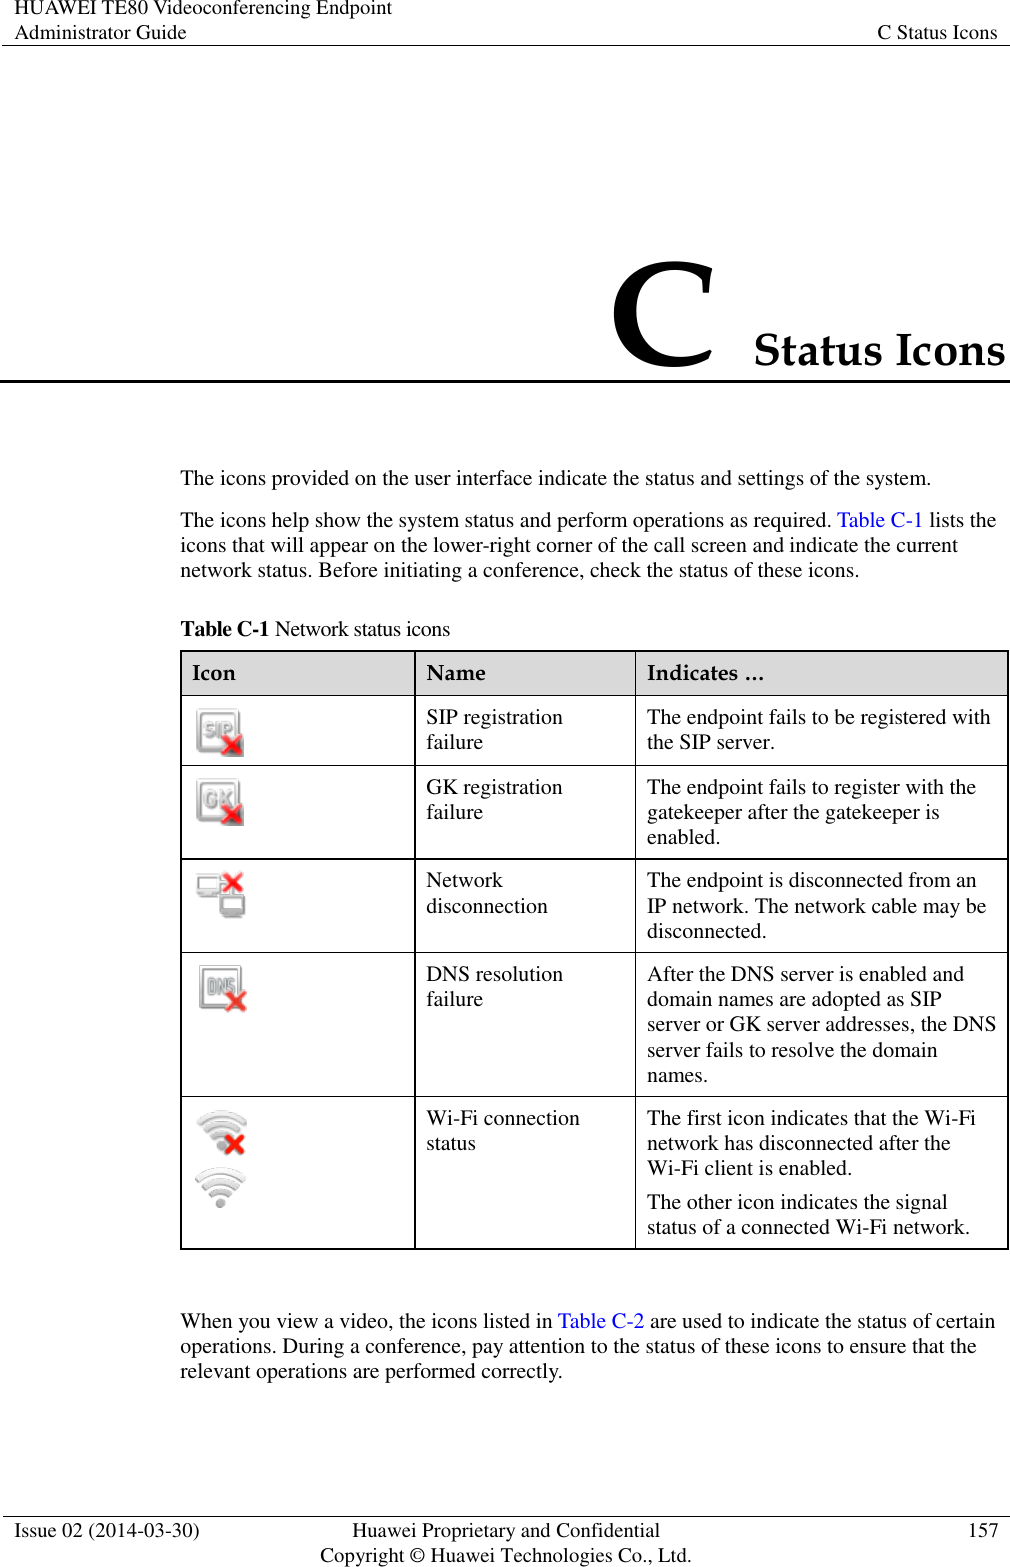 HUAWEI TE80 Videoconferencing Endpoint Administrator Guide C Status Icons  Issue 02 (2014-03-30) Huawei Proprietary and Confidential Copyright © Huawei Technologies Co., Ltd. 157  C Status Icons The icons provided on the user interface indicate the status and settings of the system. The icons help show the system status and perform operations as required. Table C-1 lists the icons that will appear on the lower-right corner of the call screen and indicate the current network status. Before initiating a conference, check the status of these icons. Table C-1 Network status icons Icon Name Indicates …  SIP registration failure The endpoint fails to be registered with the SIP server.  GK registration failure The endpoint fails to register with the gatekeeper after the gatekeeper is enabled.  Network disconnection The endpoint is disconnected from an IP network. The network cable may be disconnected.  DNS resolution failure After the DNS server is enabled and domain names are adopted as SIP server or GK server addresses, the DNS server fails to resolve the domain names.   Wi-Fi connection status The first icon indicates that the Wi-Fi network has disconnected after the Wi-Fi client is enabled. The other icon indicates the signal status of a connected Wi-Fi network.  When you view a video, the icons listed in Table C-2 are used to indicate the status of certain operations. During a conference, pay attention to the status of these icons to ensure that the relevant operations are performed correctly. 